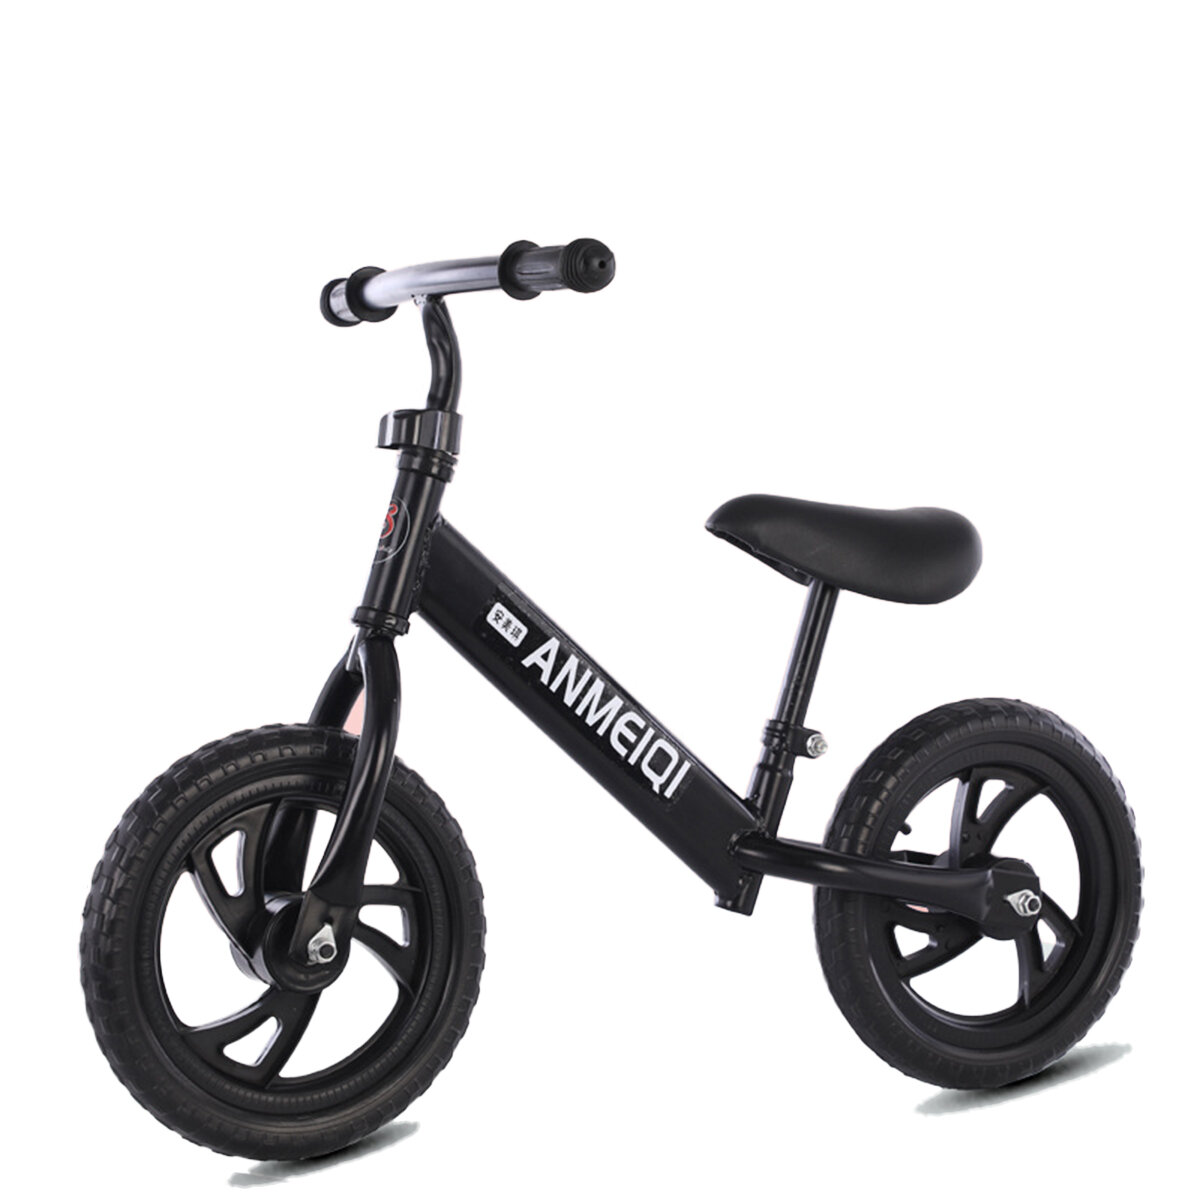 12inch Kids No Pedal Non-slip Safety Balance Bike for Aged 1-6 Children Toddler Bicycle with Foam Wheel Balance Training